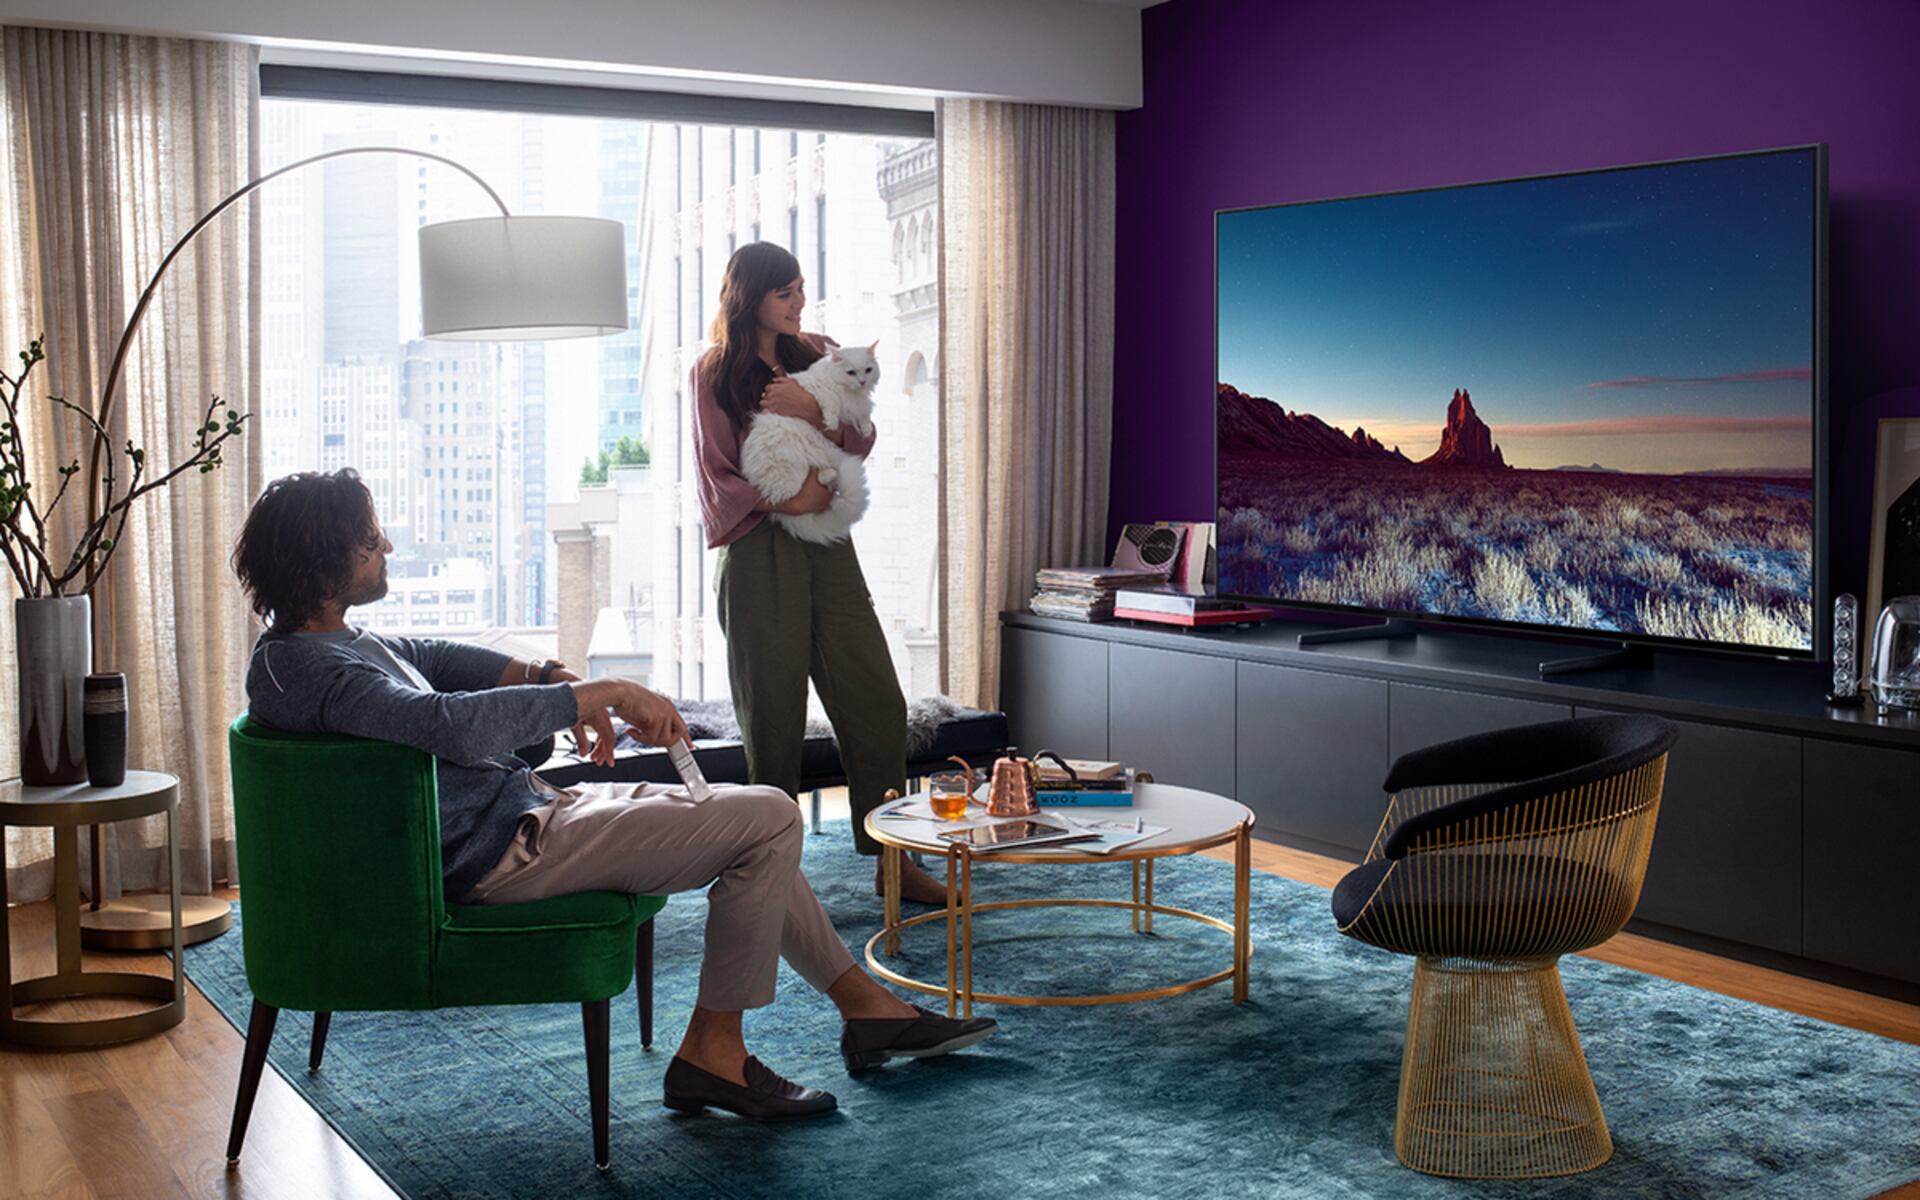 What Are The Best Picture Settings For Samsung QLED TV